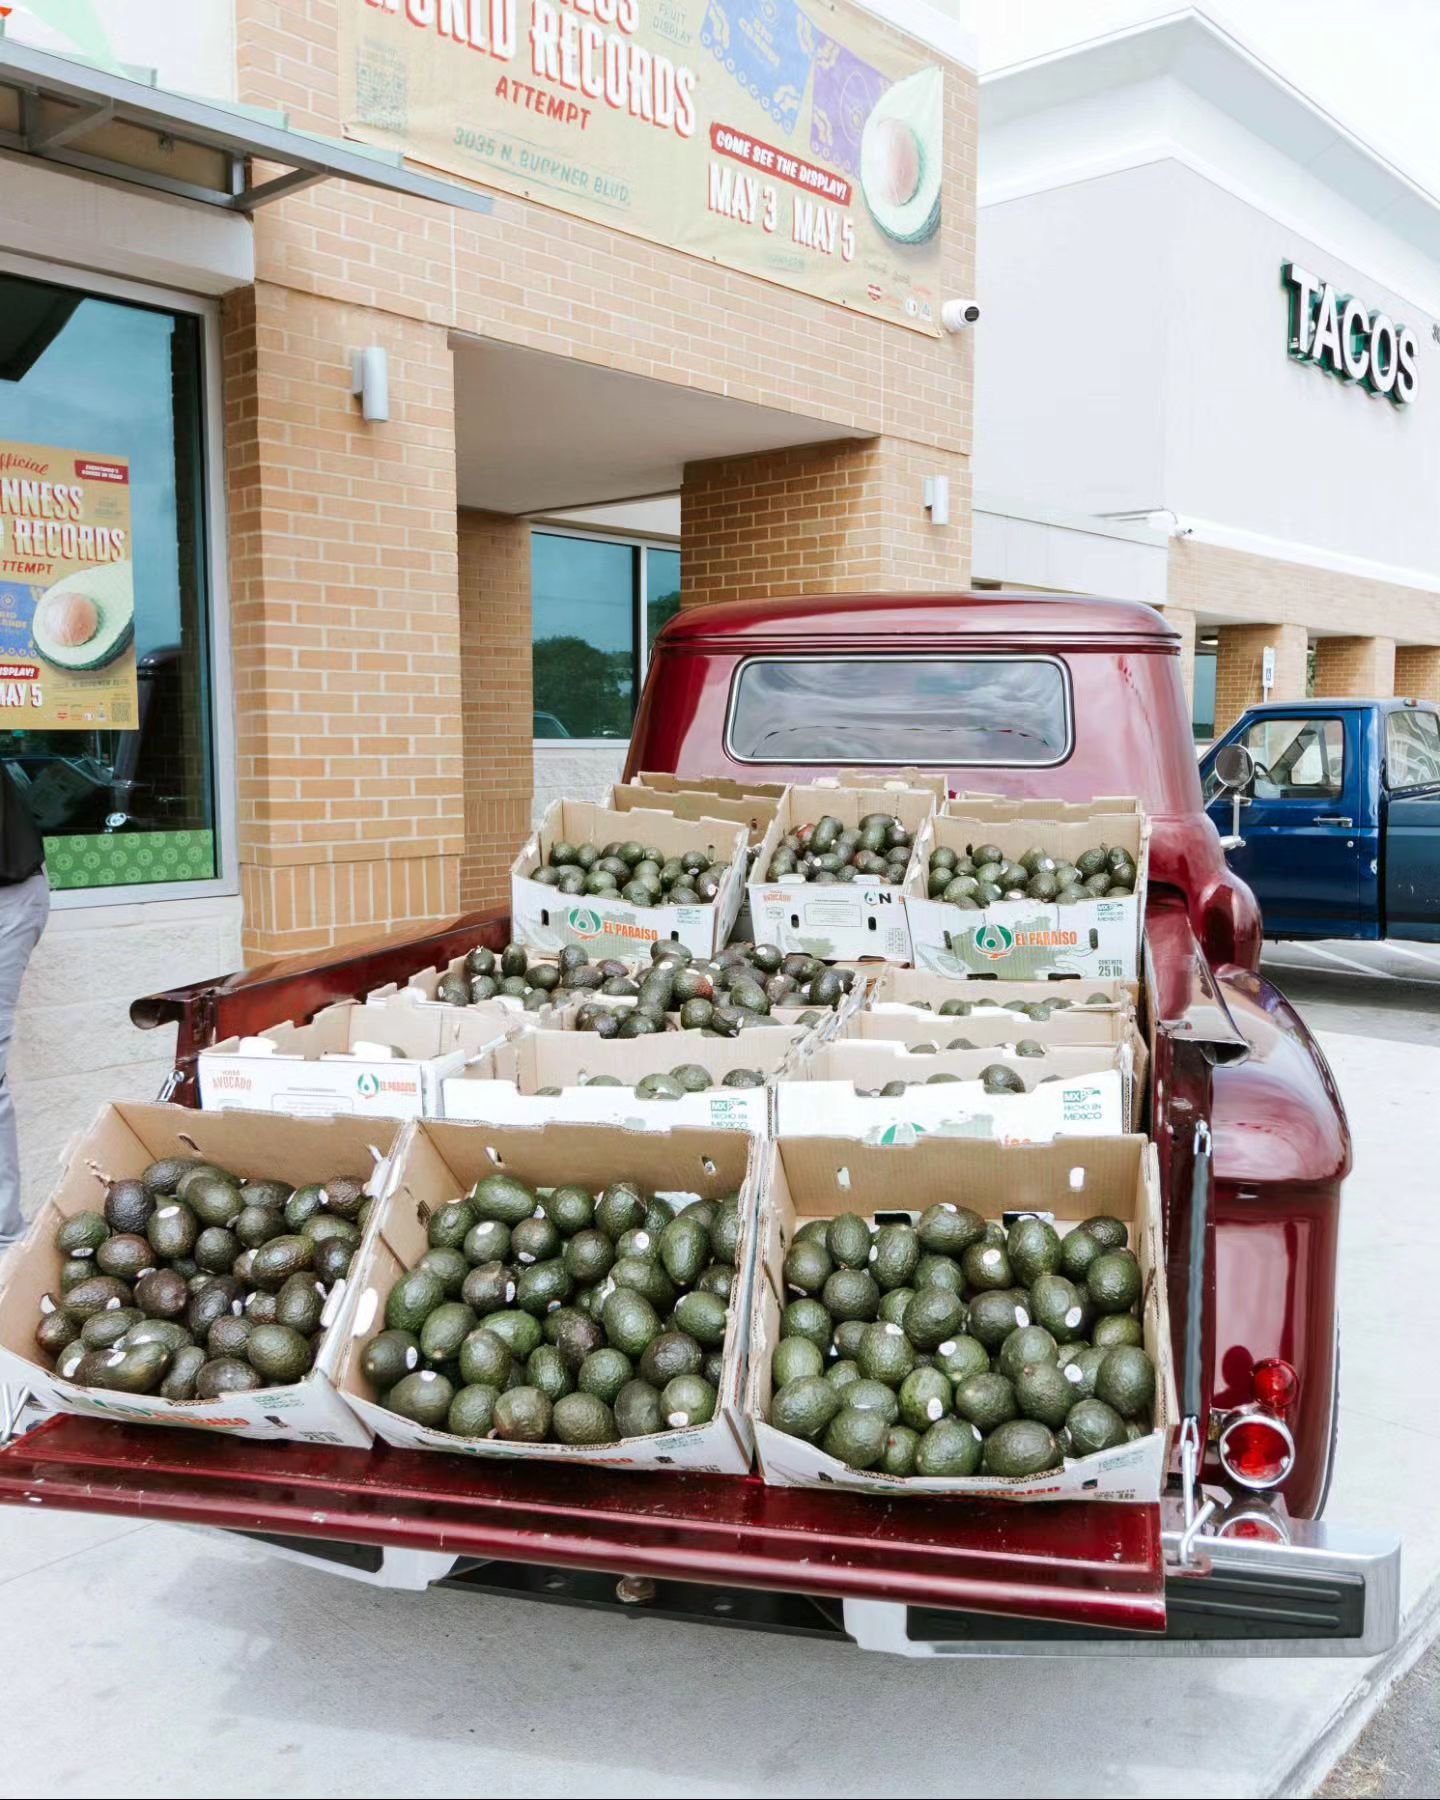 Looking for avocados 🥑 this weekend for Cinco de Mayo🪅? Head over to @elriograndemarket at their Buckner location. We think they have some. 😉